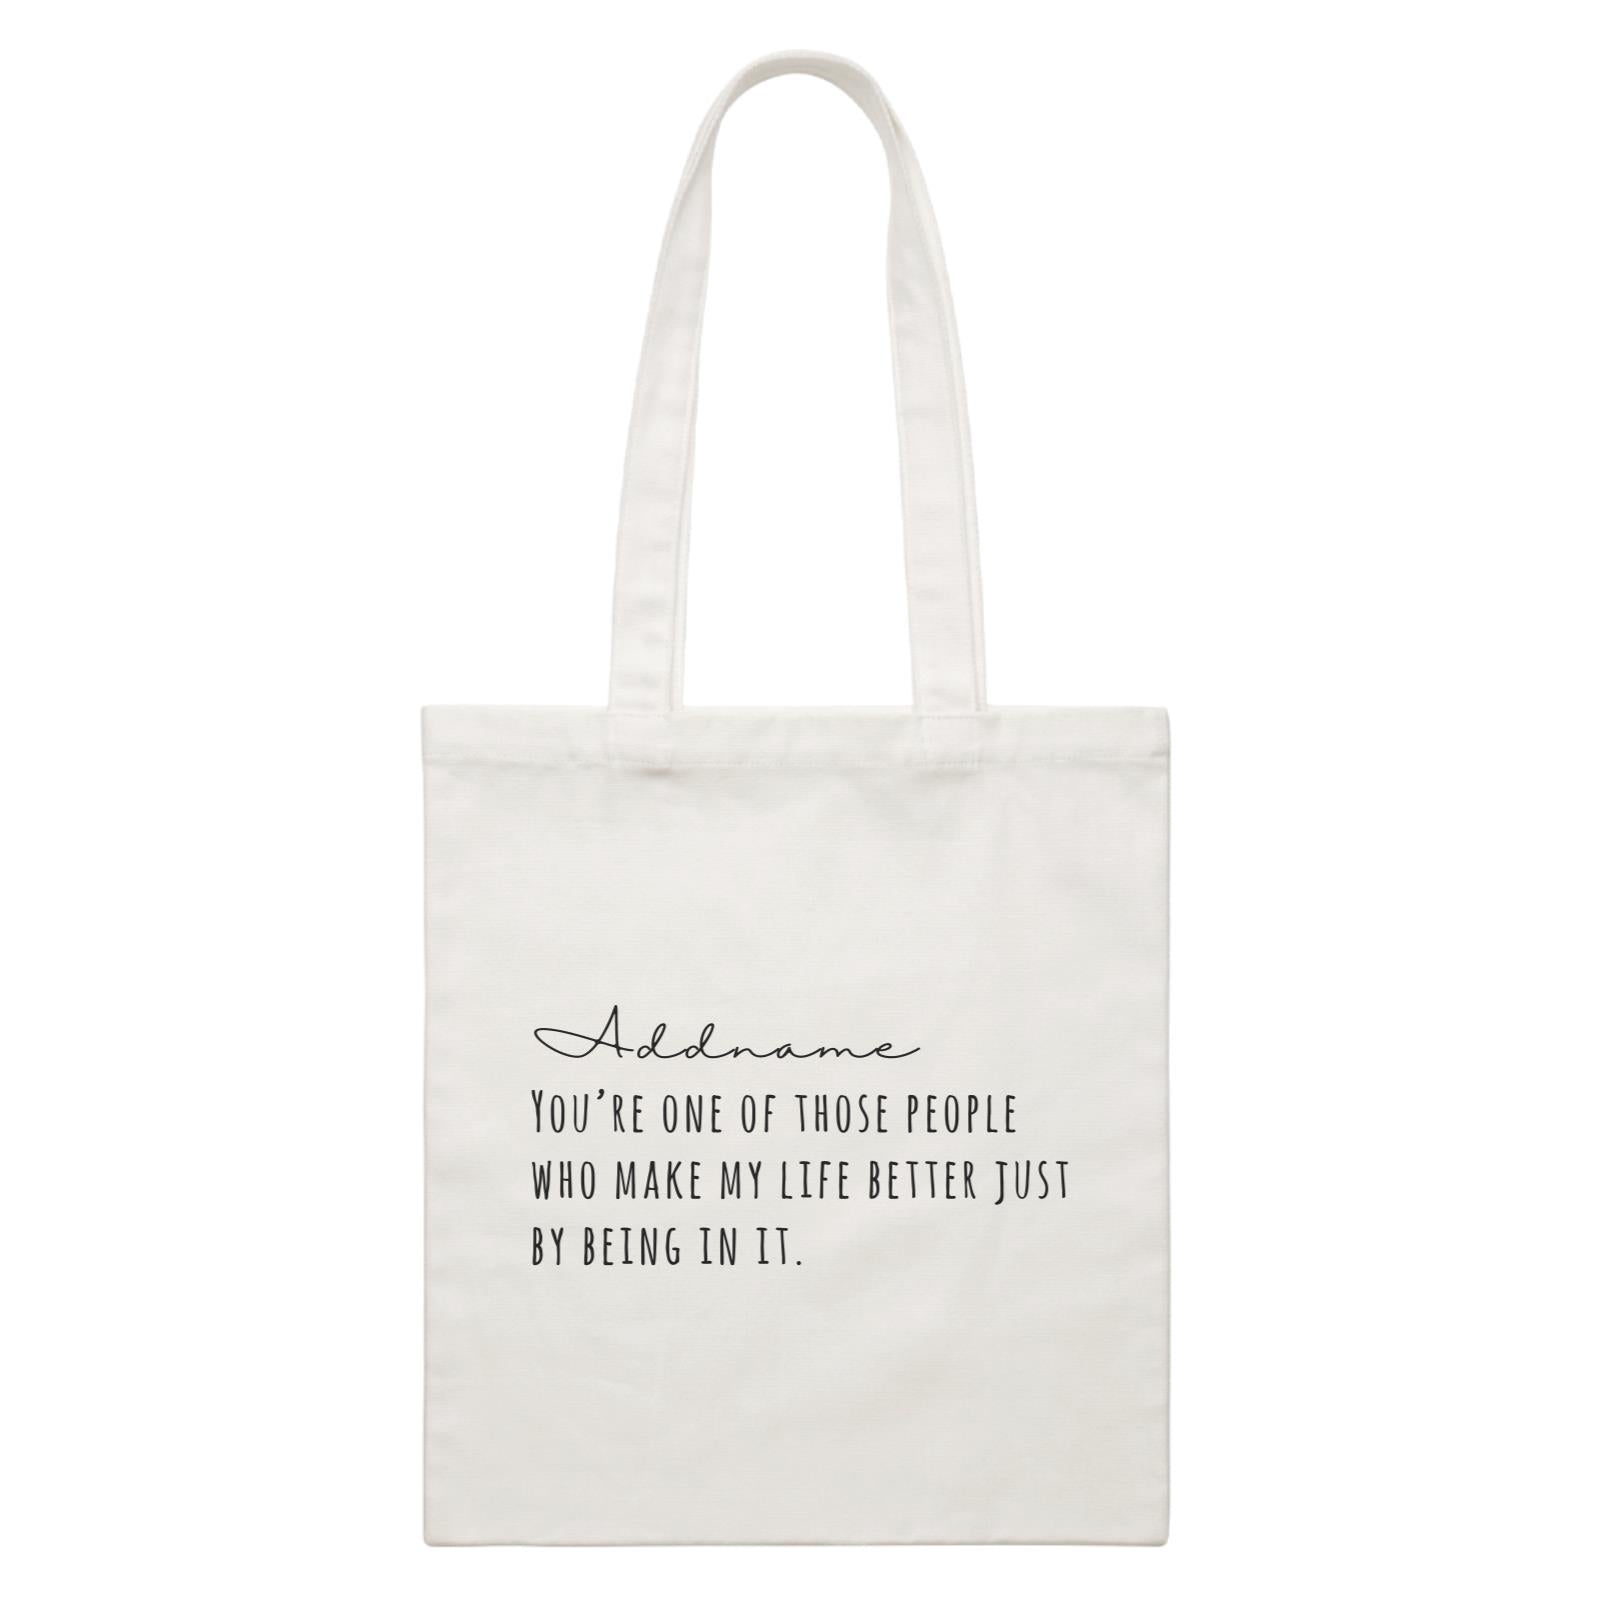 Best Friends Quotes Addname You're One Of The Those People Who Make My Life Better White Canvas Bag